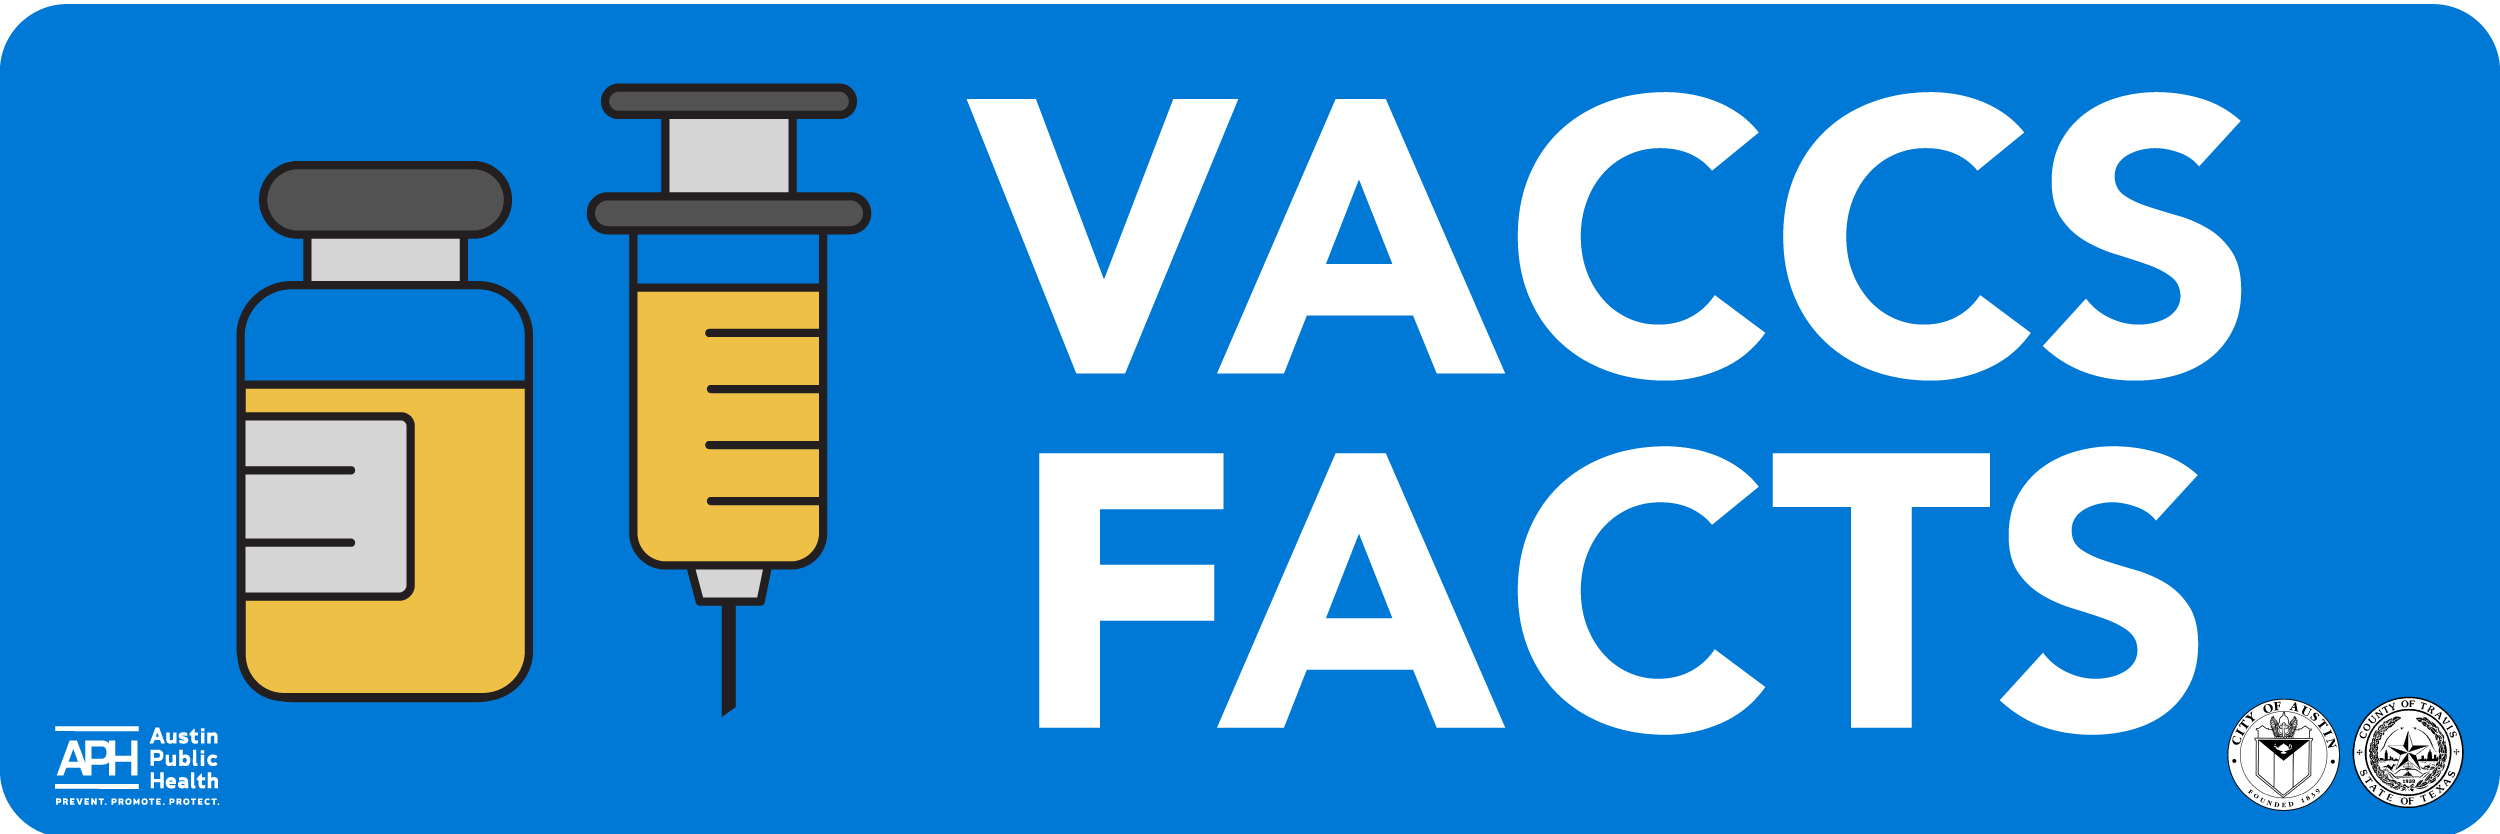 Vaccs Facts text with a vaccine syringe image